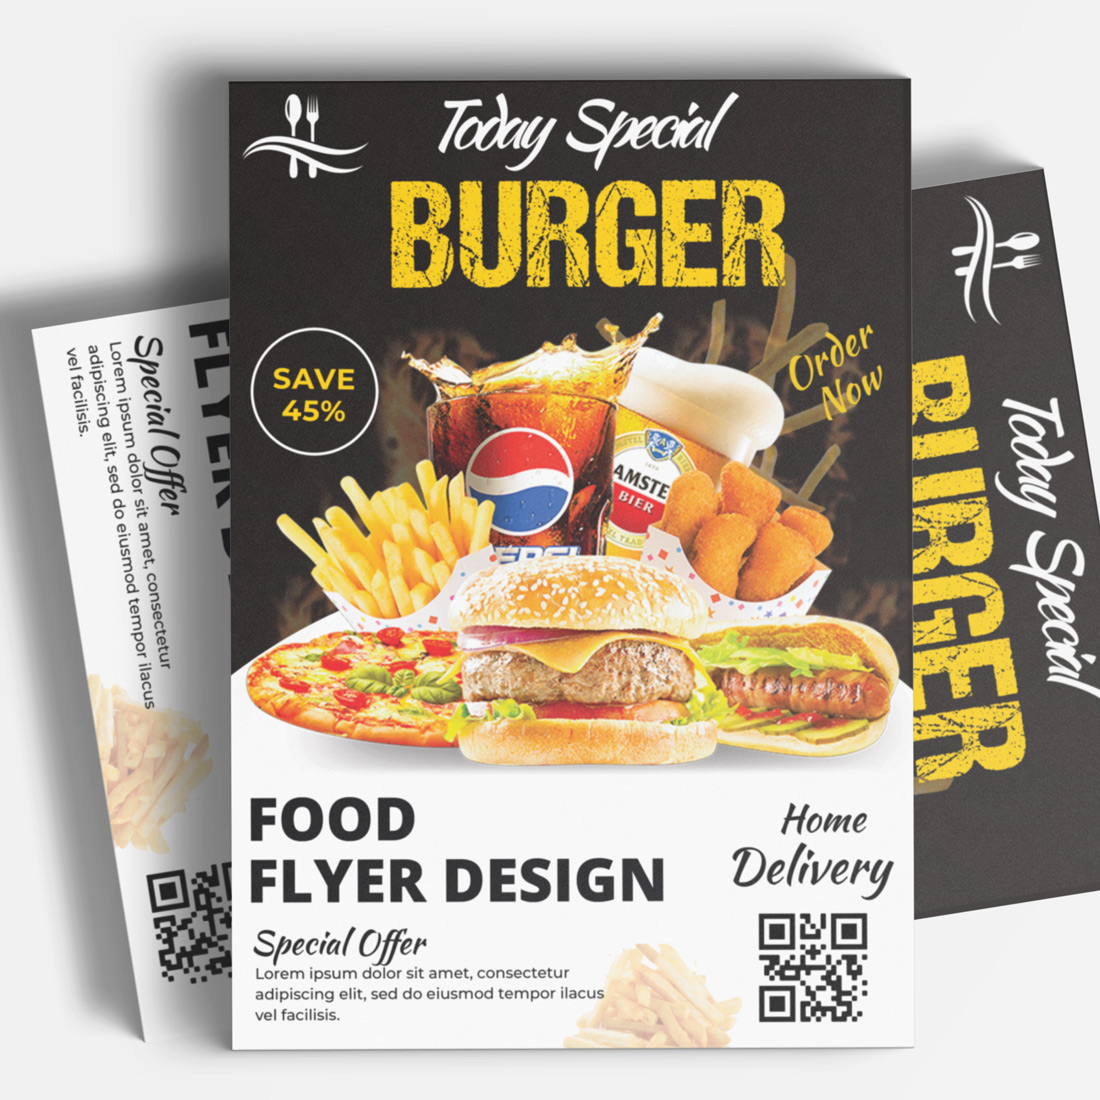 Food Flyer Design Template main cover.